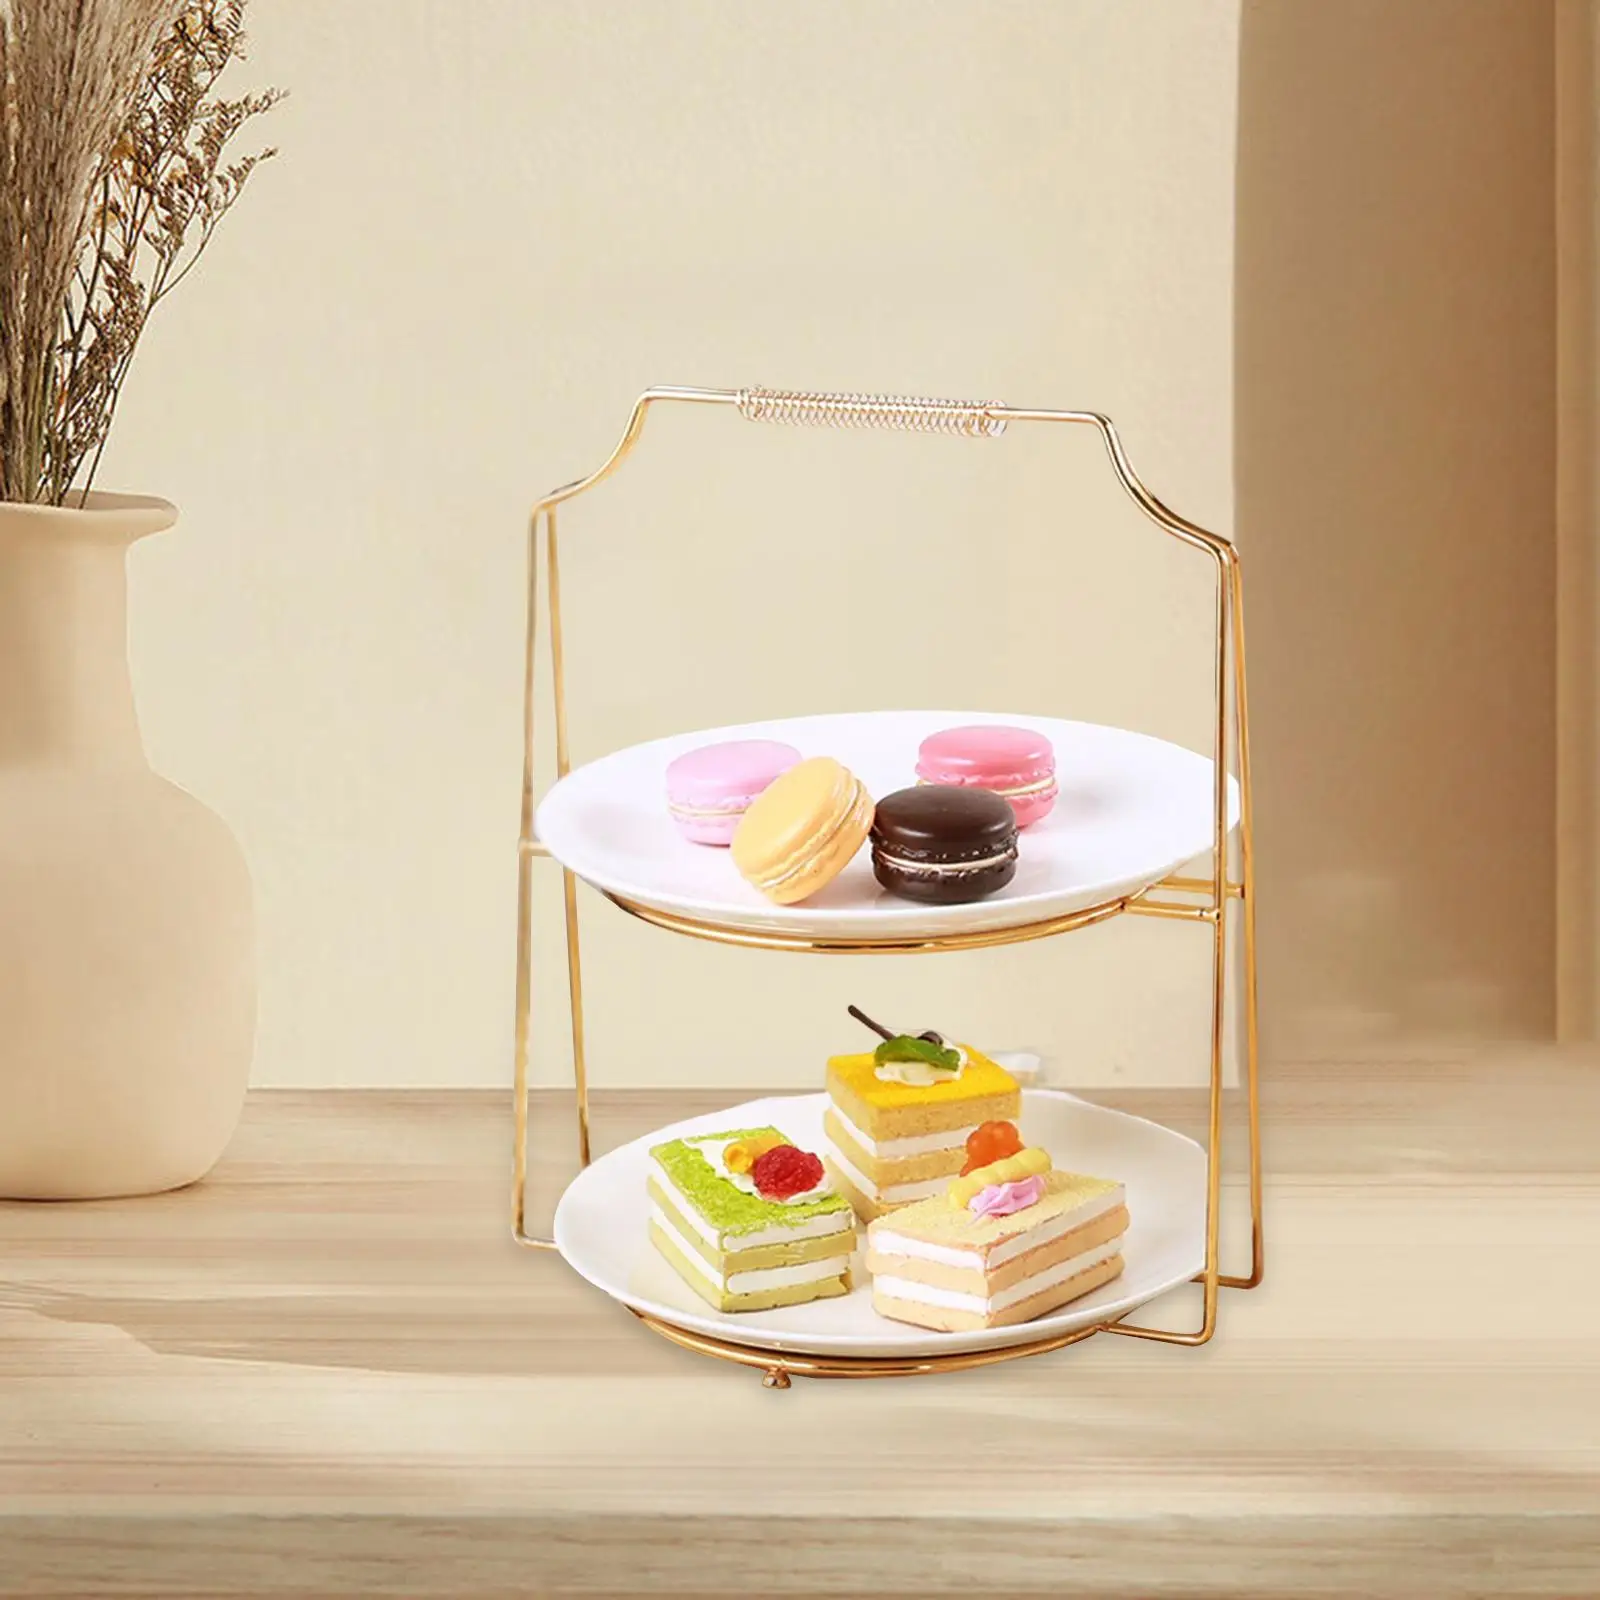 Classic 2 Tiered Cake Stand Stylish Presentation Display Fruit Candy Shelf for